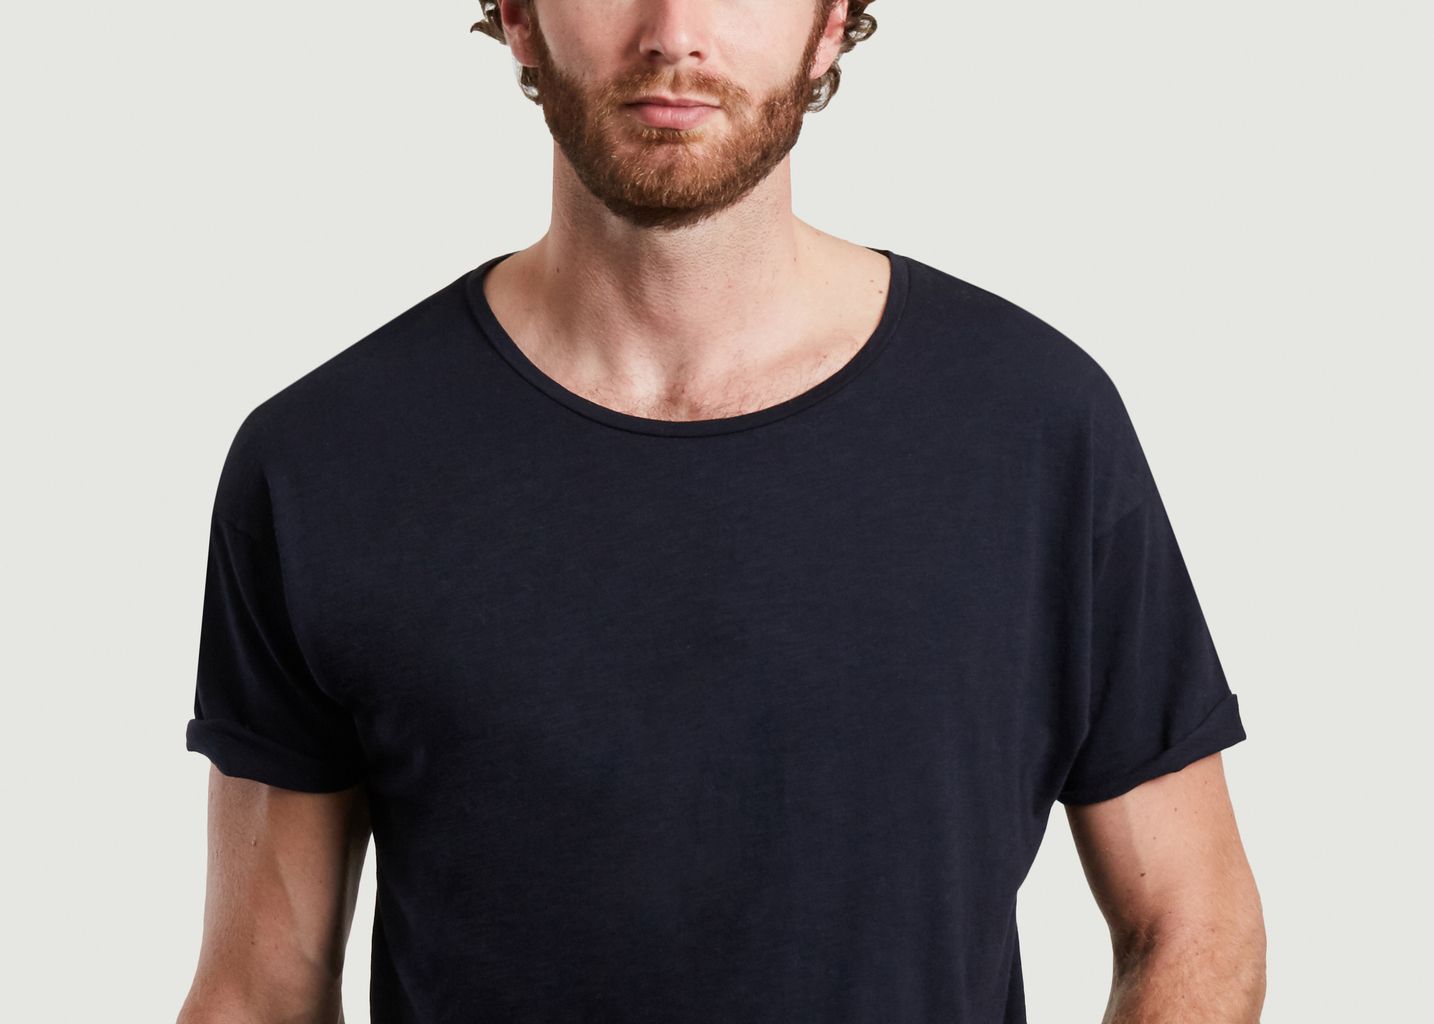 Roger organic cotton t-shirt  - Nudie Jeans